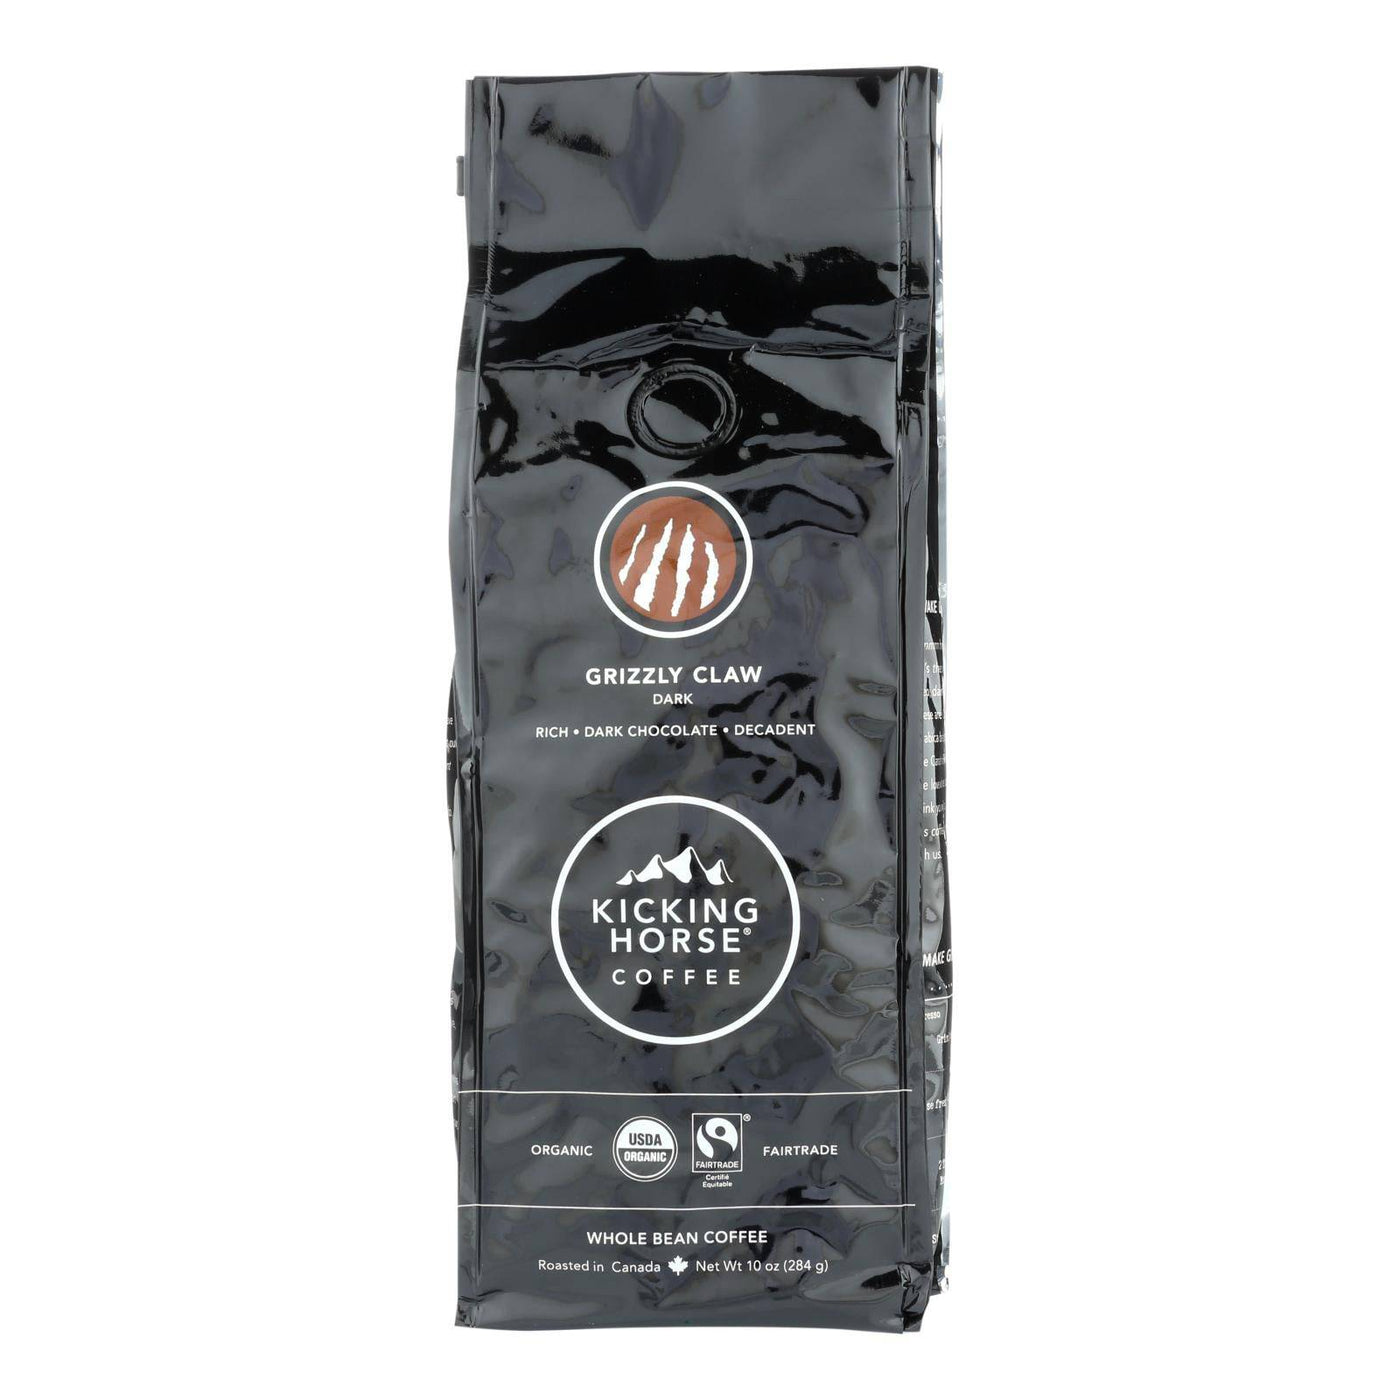 Buy Kicking Horse Coffee - Organic - Whole Bean - Grizzly Claw - Dark Roast - 10 Oz - Case Of 6  at OnlyNaturals.us